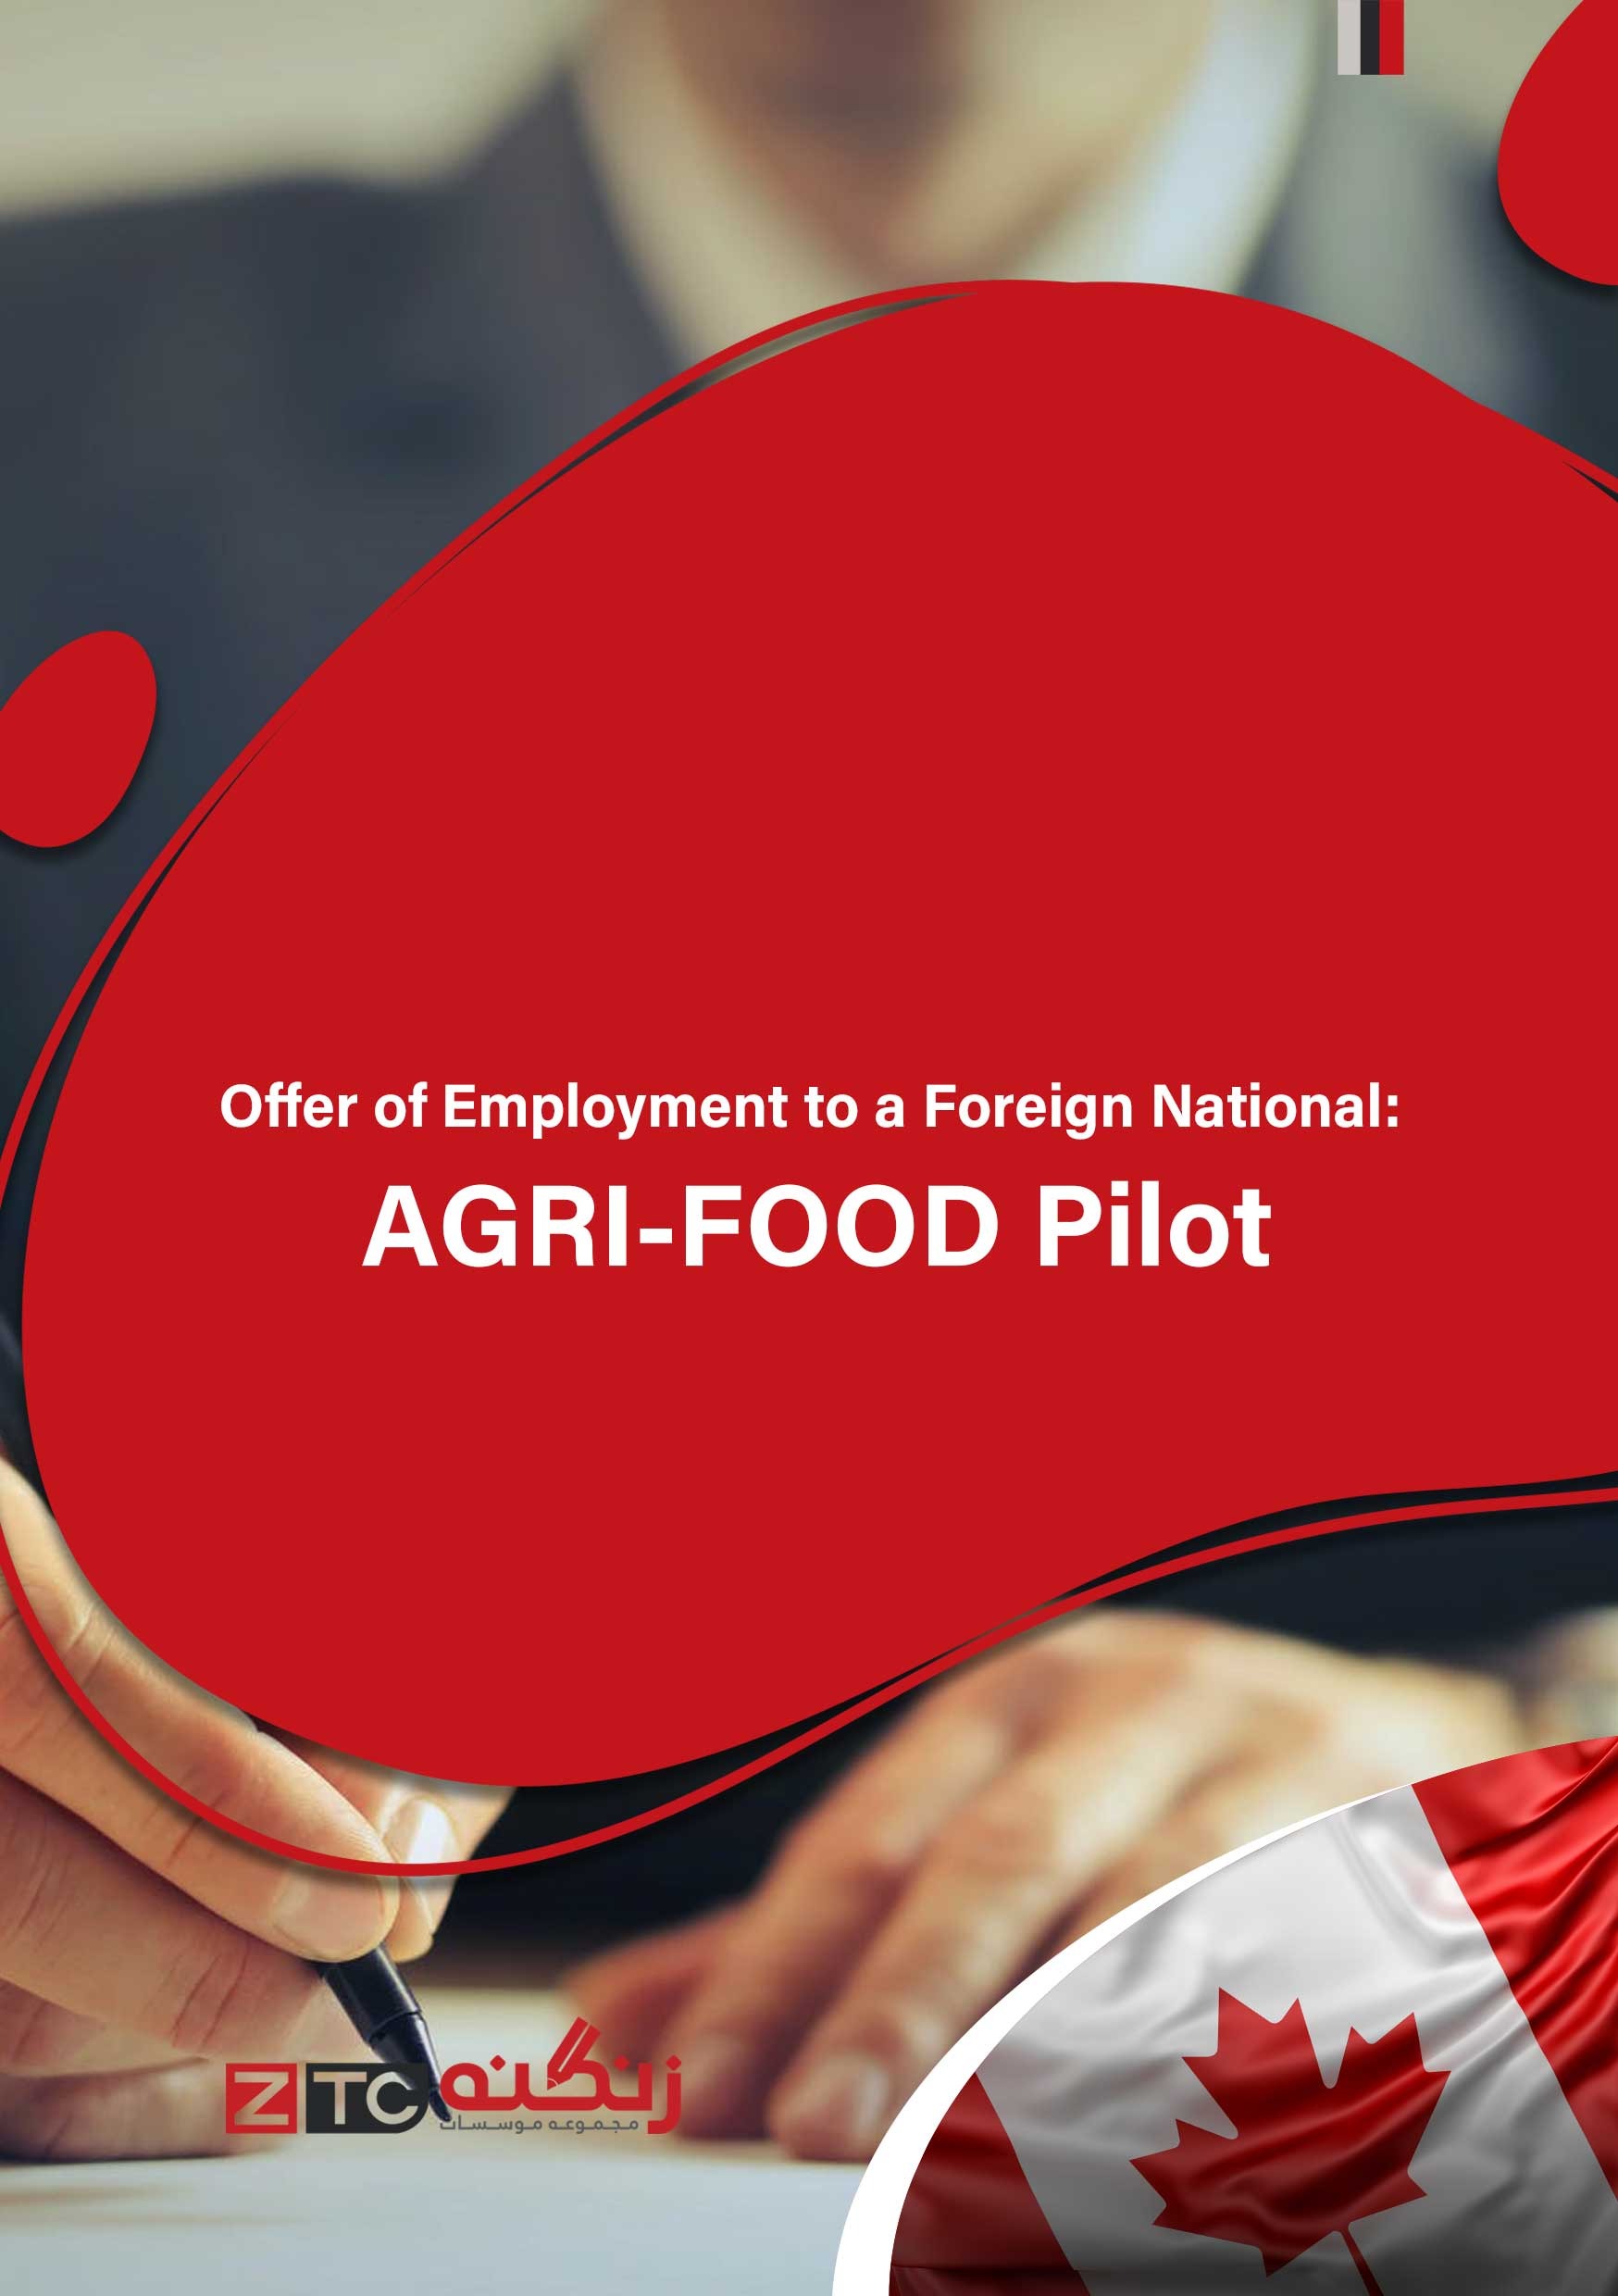 Offer of Employment to a Foreign National - AGRI-FOOD Pilot